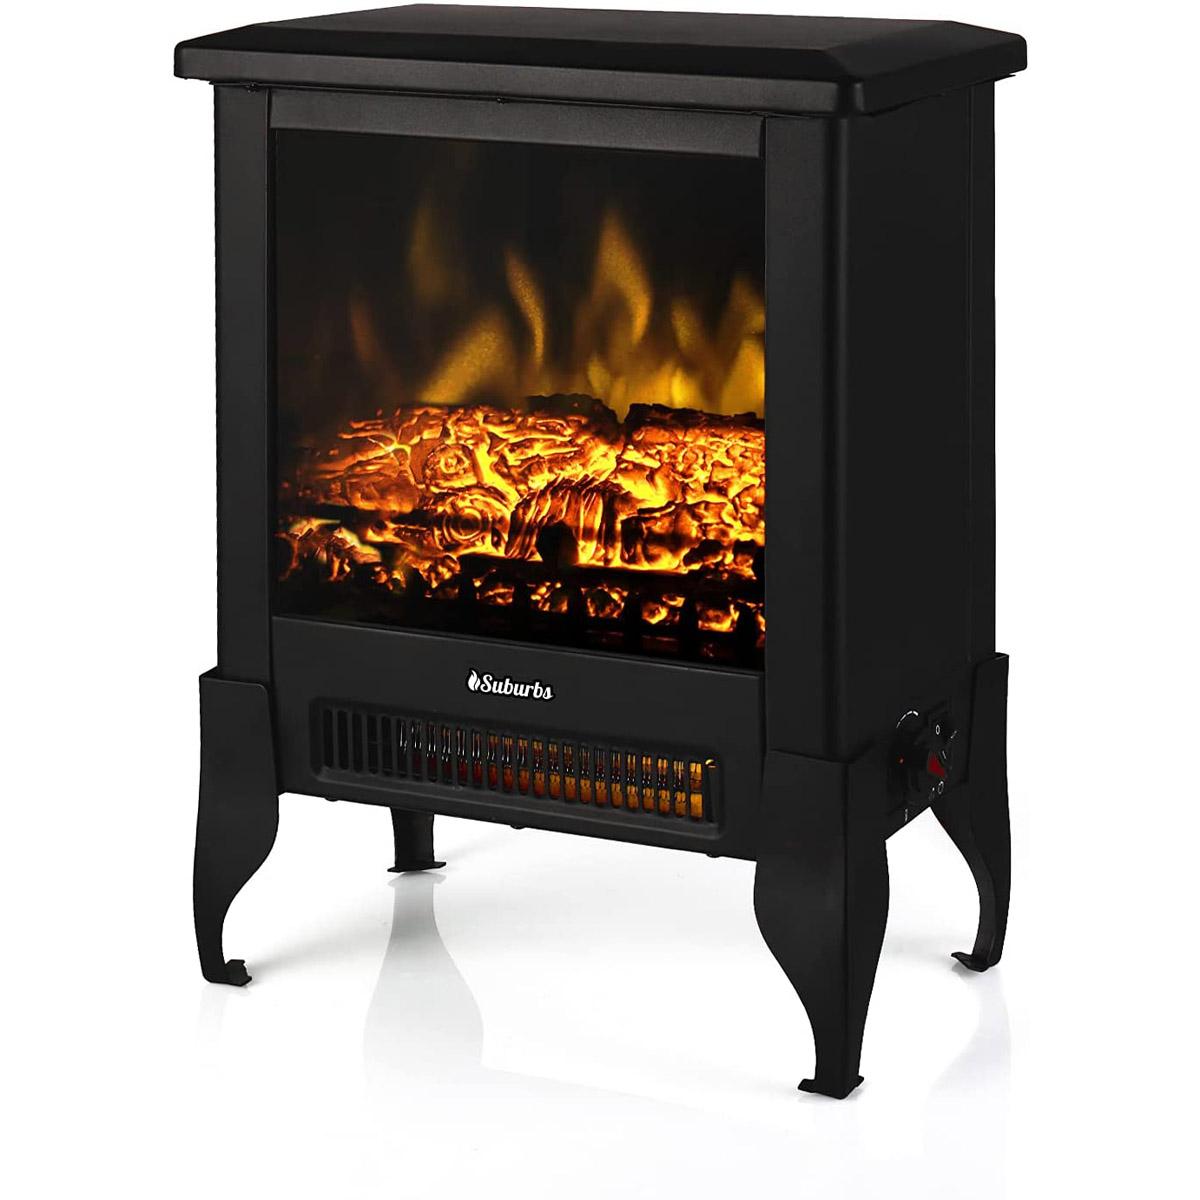 Turbro Suburbs TS17 Compact Electric Fireplace Stove for $63 Shipped